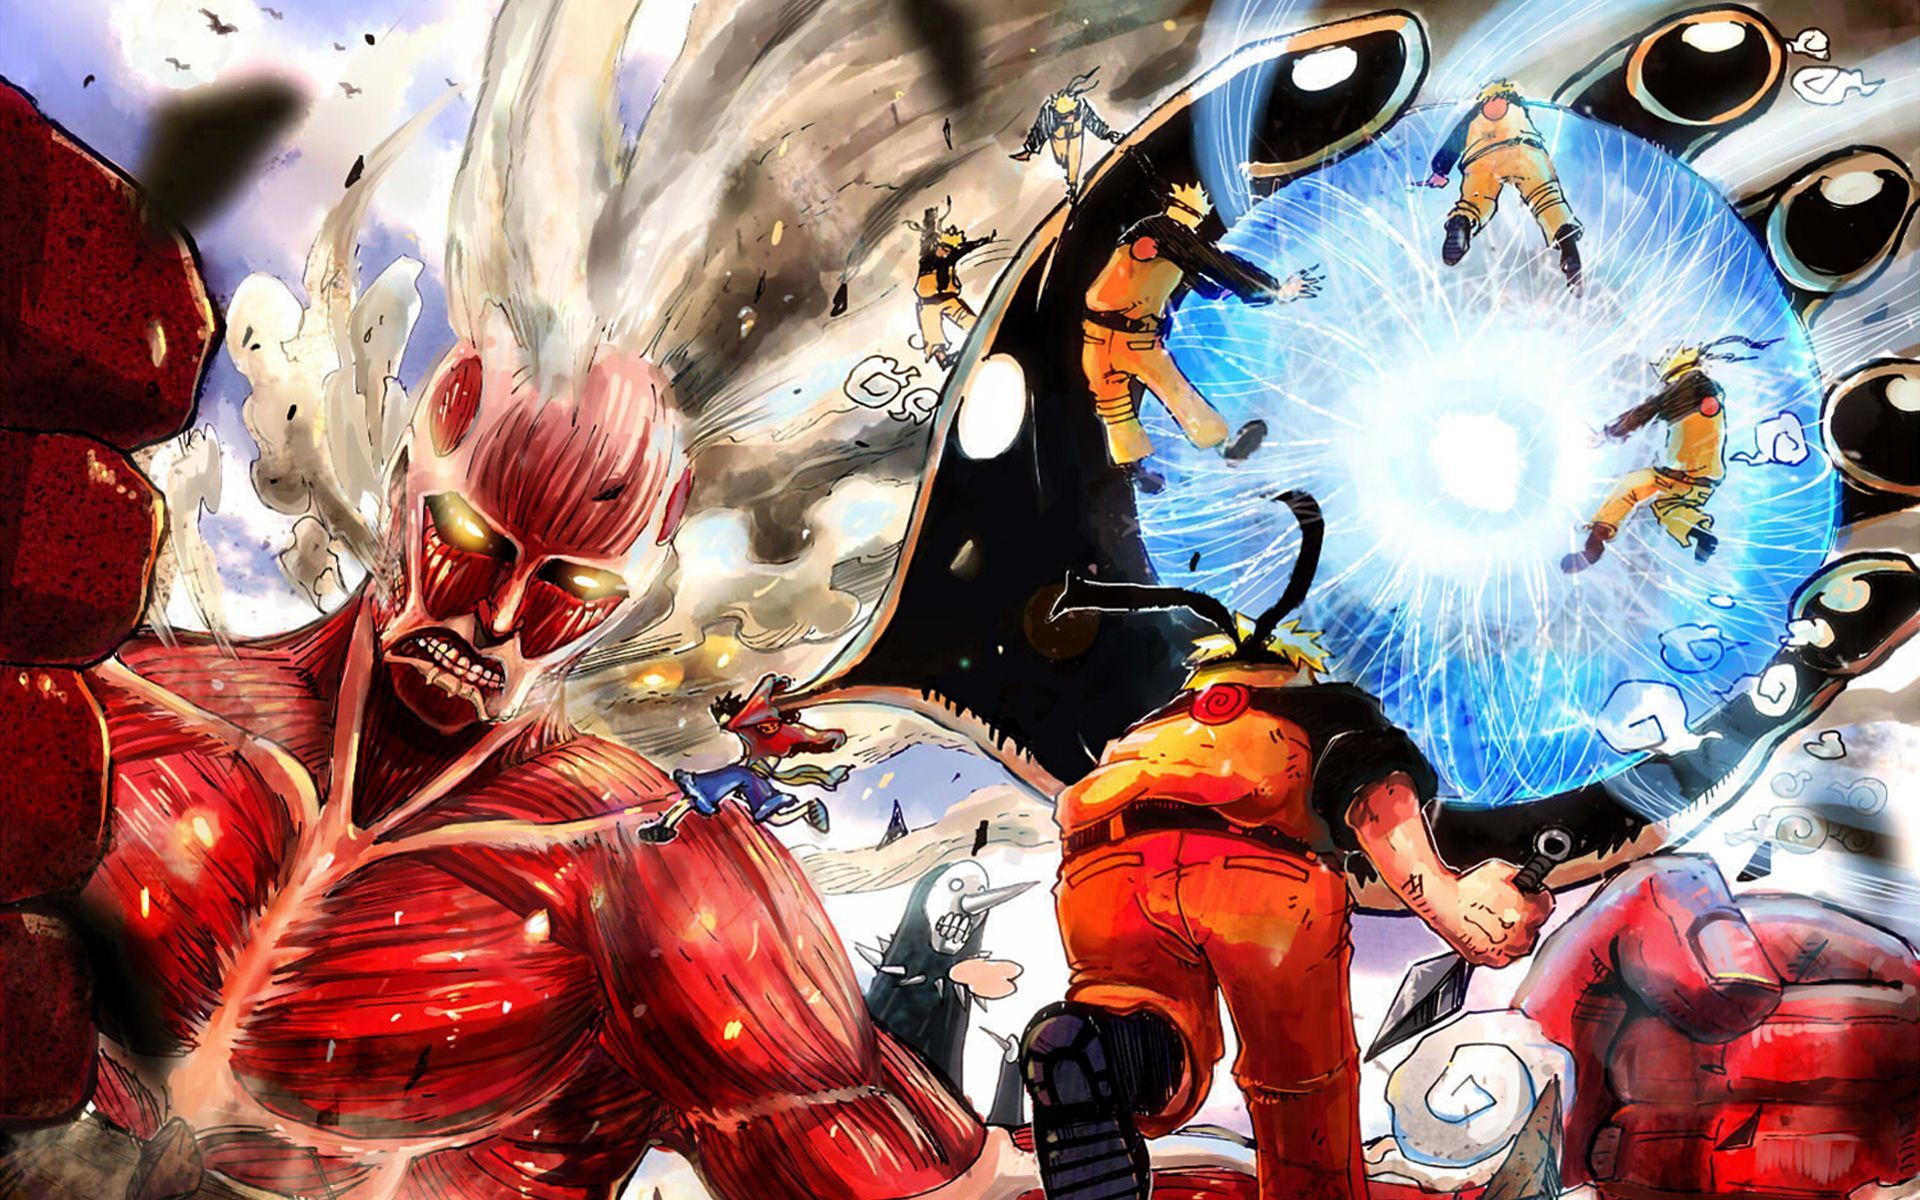 Anime One Piece And Naruto Wallpapers Wallpaper Cave